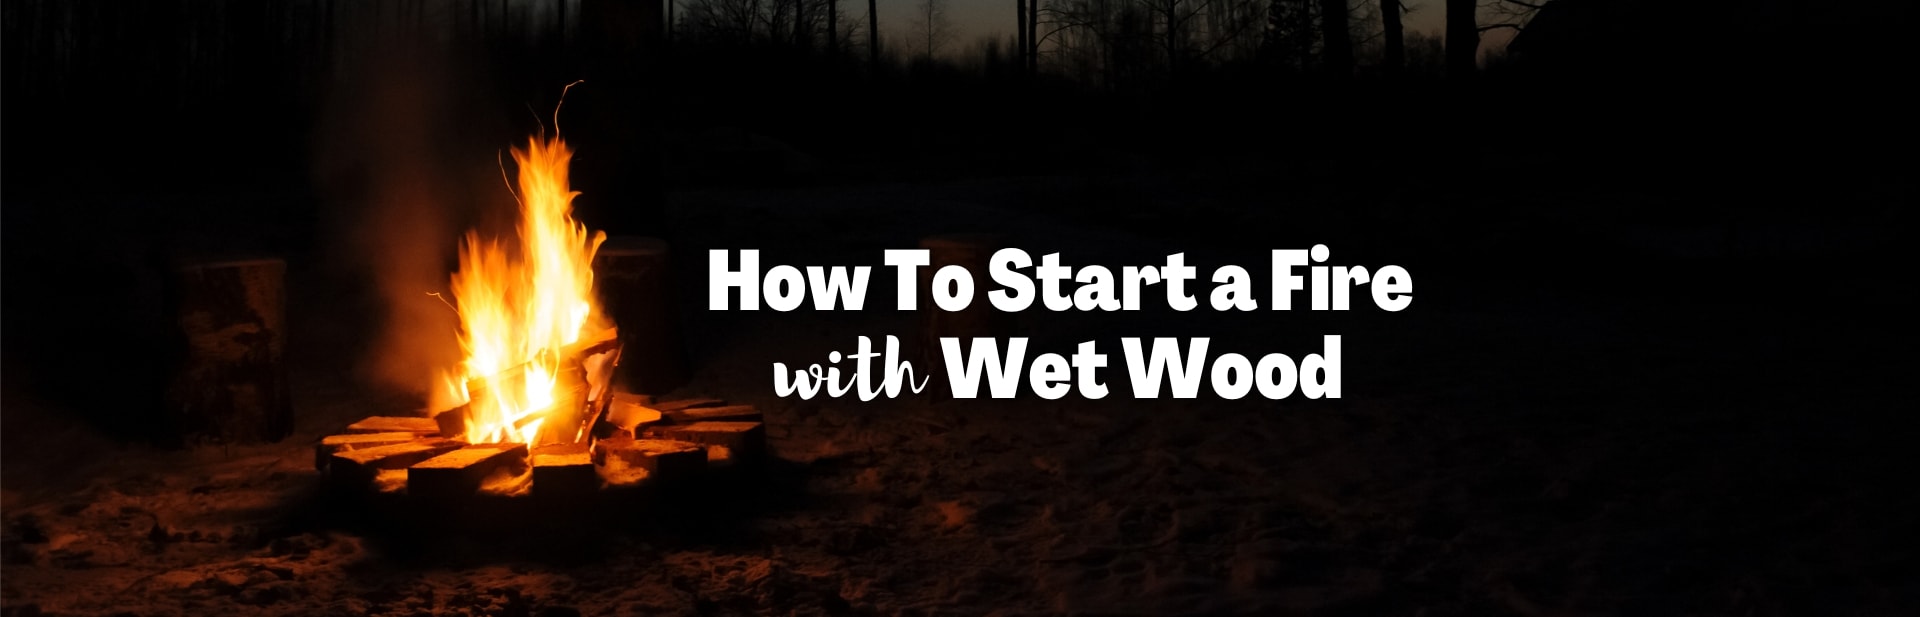 No Dry Wood? No Problem: How to Start a Fire with Wet Wood